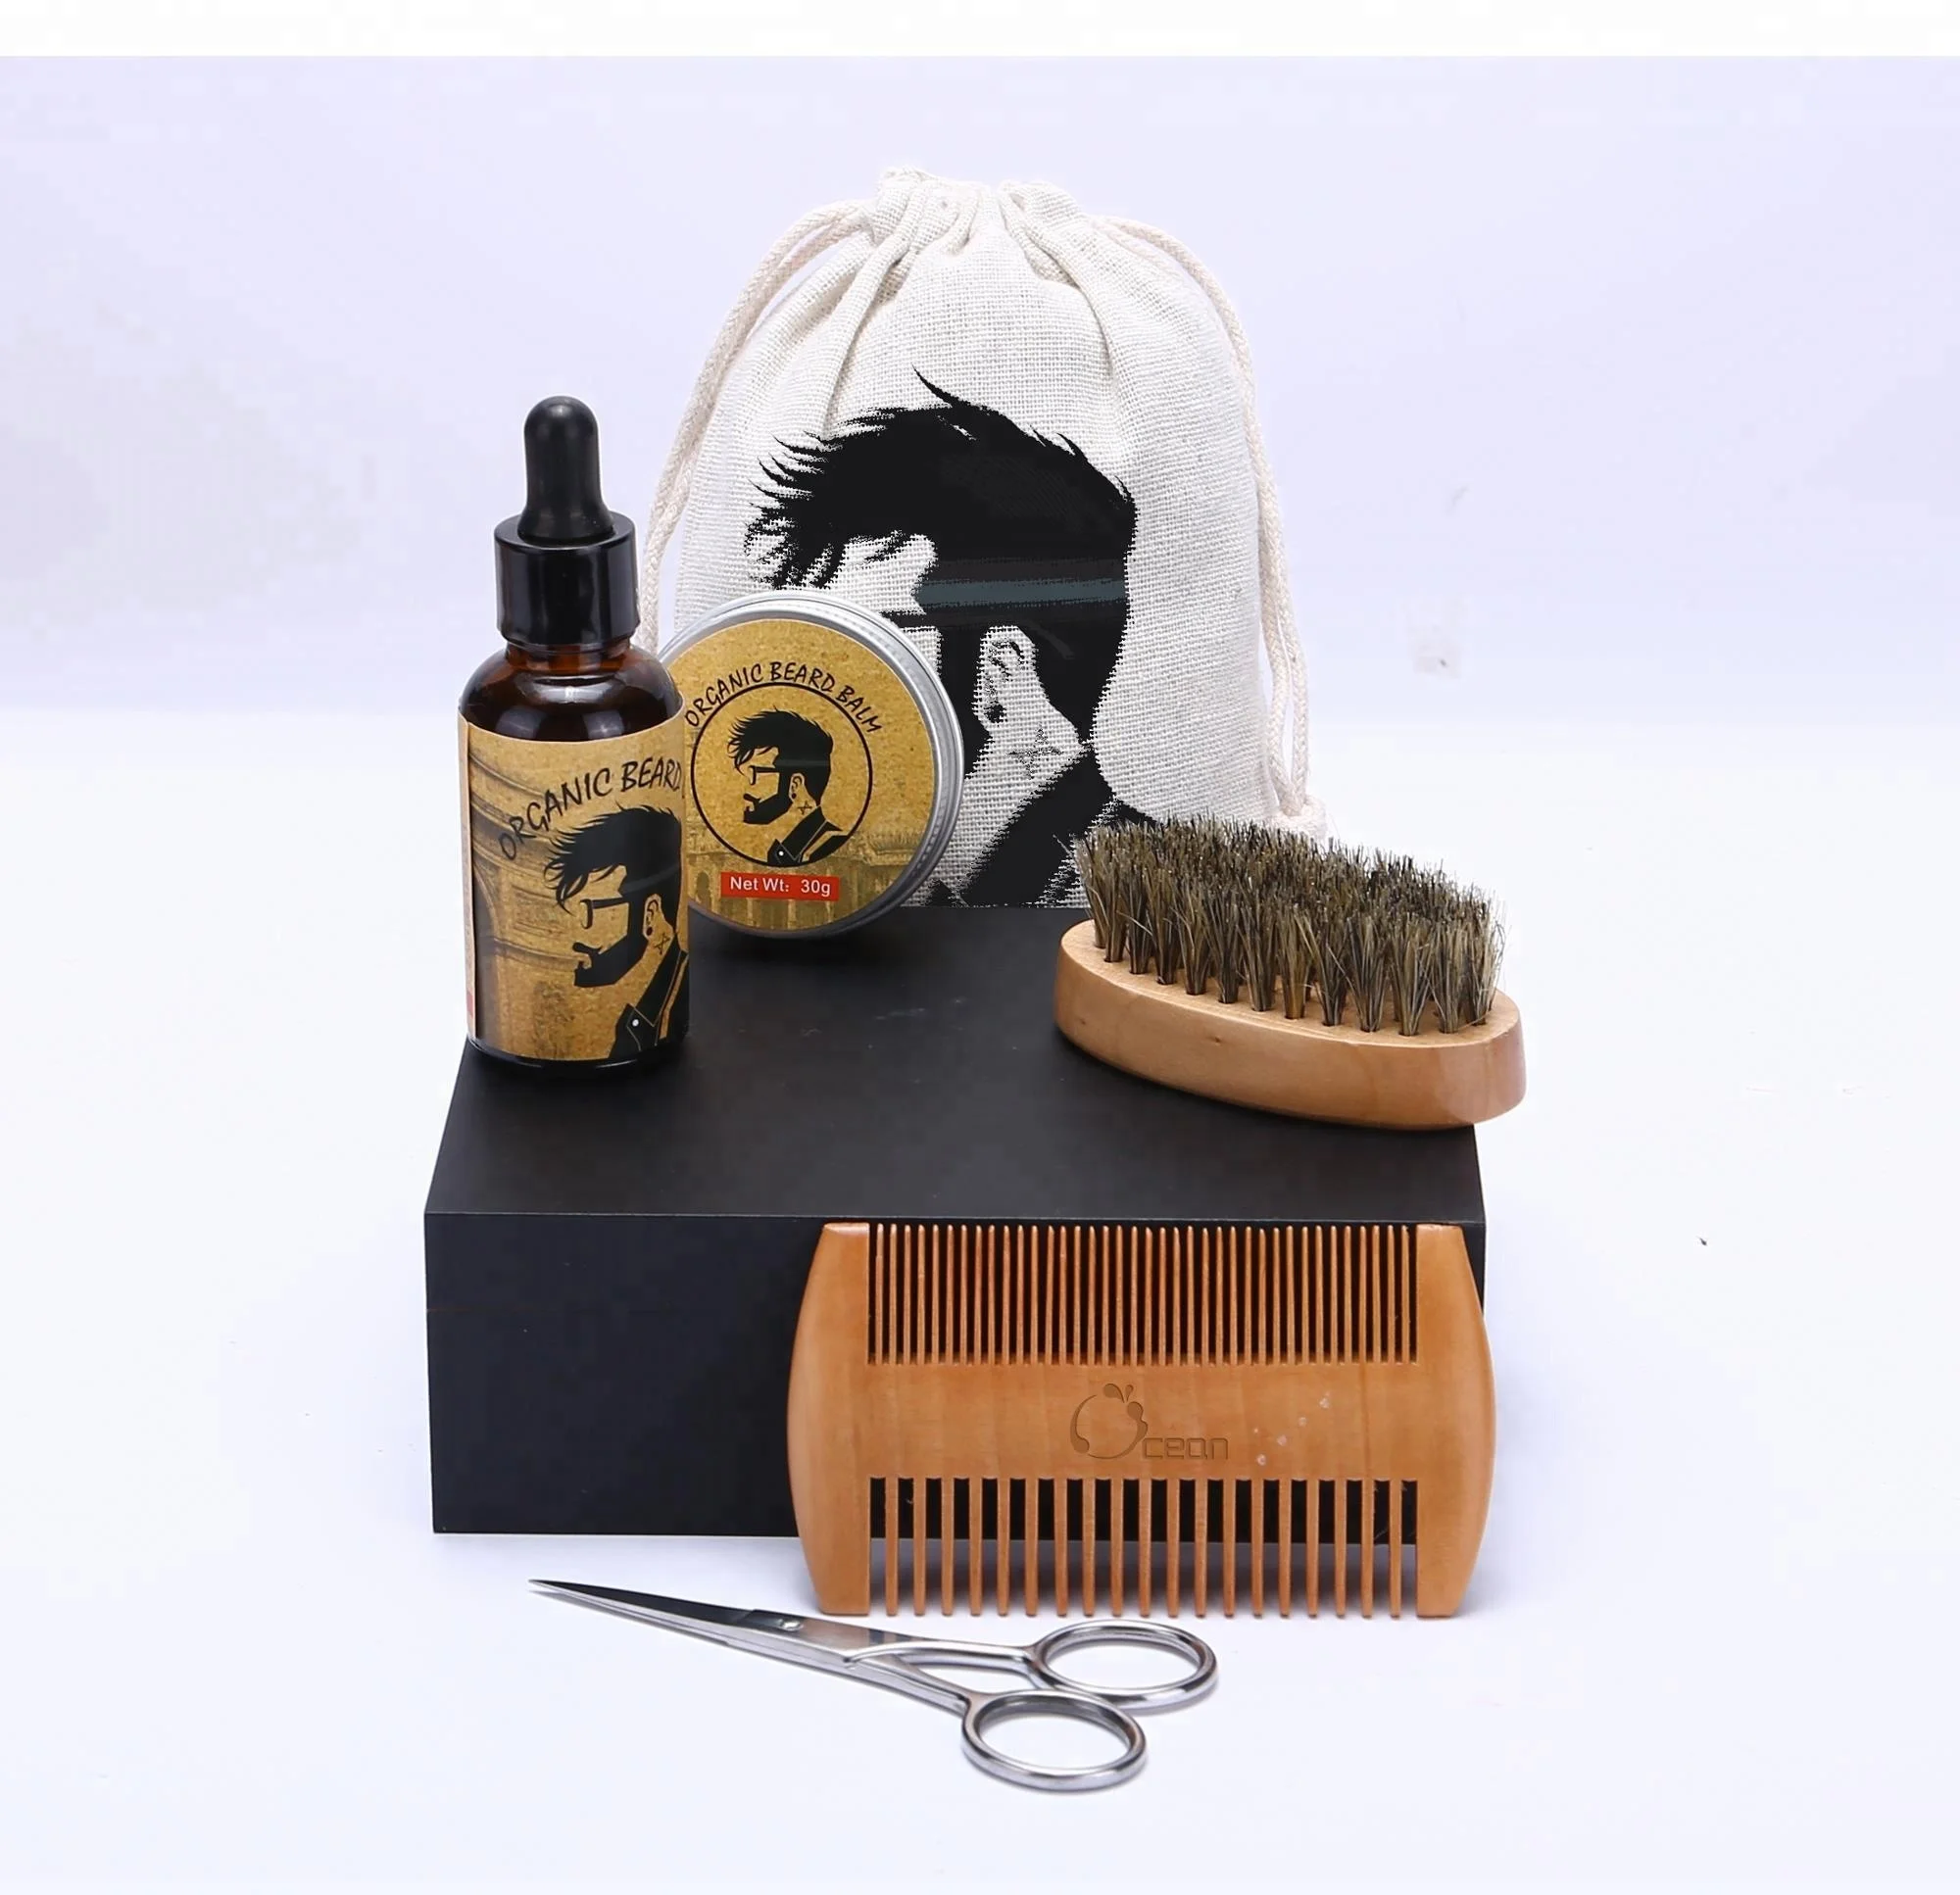 

private label beard oil and scented balm wax beard grooming kit for men